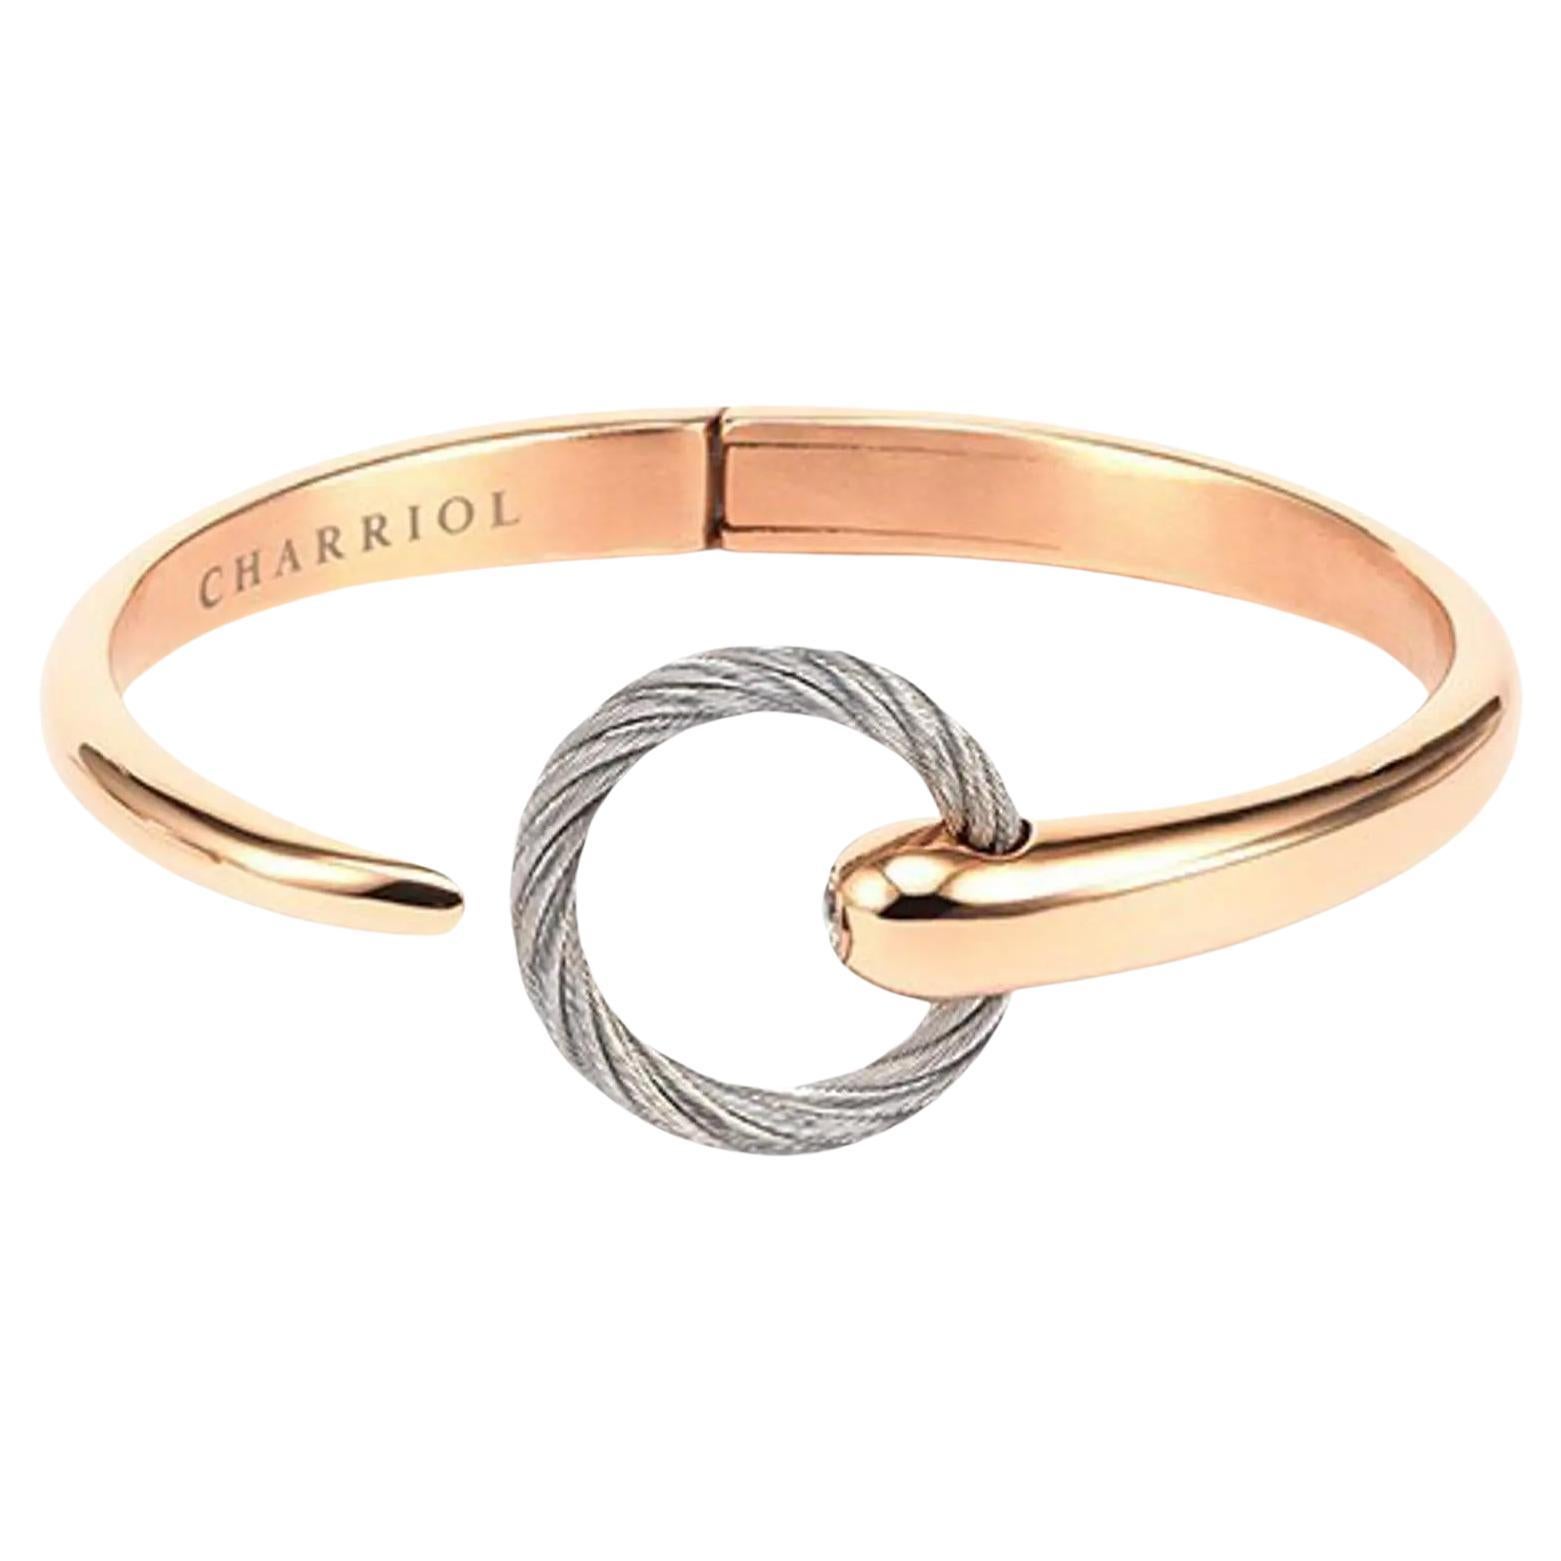 Charriol Infinity Zen Rose Gold PVD Steel Cable Bangle 04-102-1232-0 Taille M